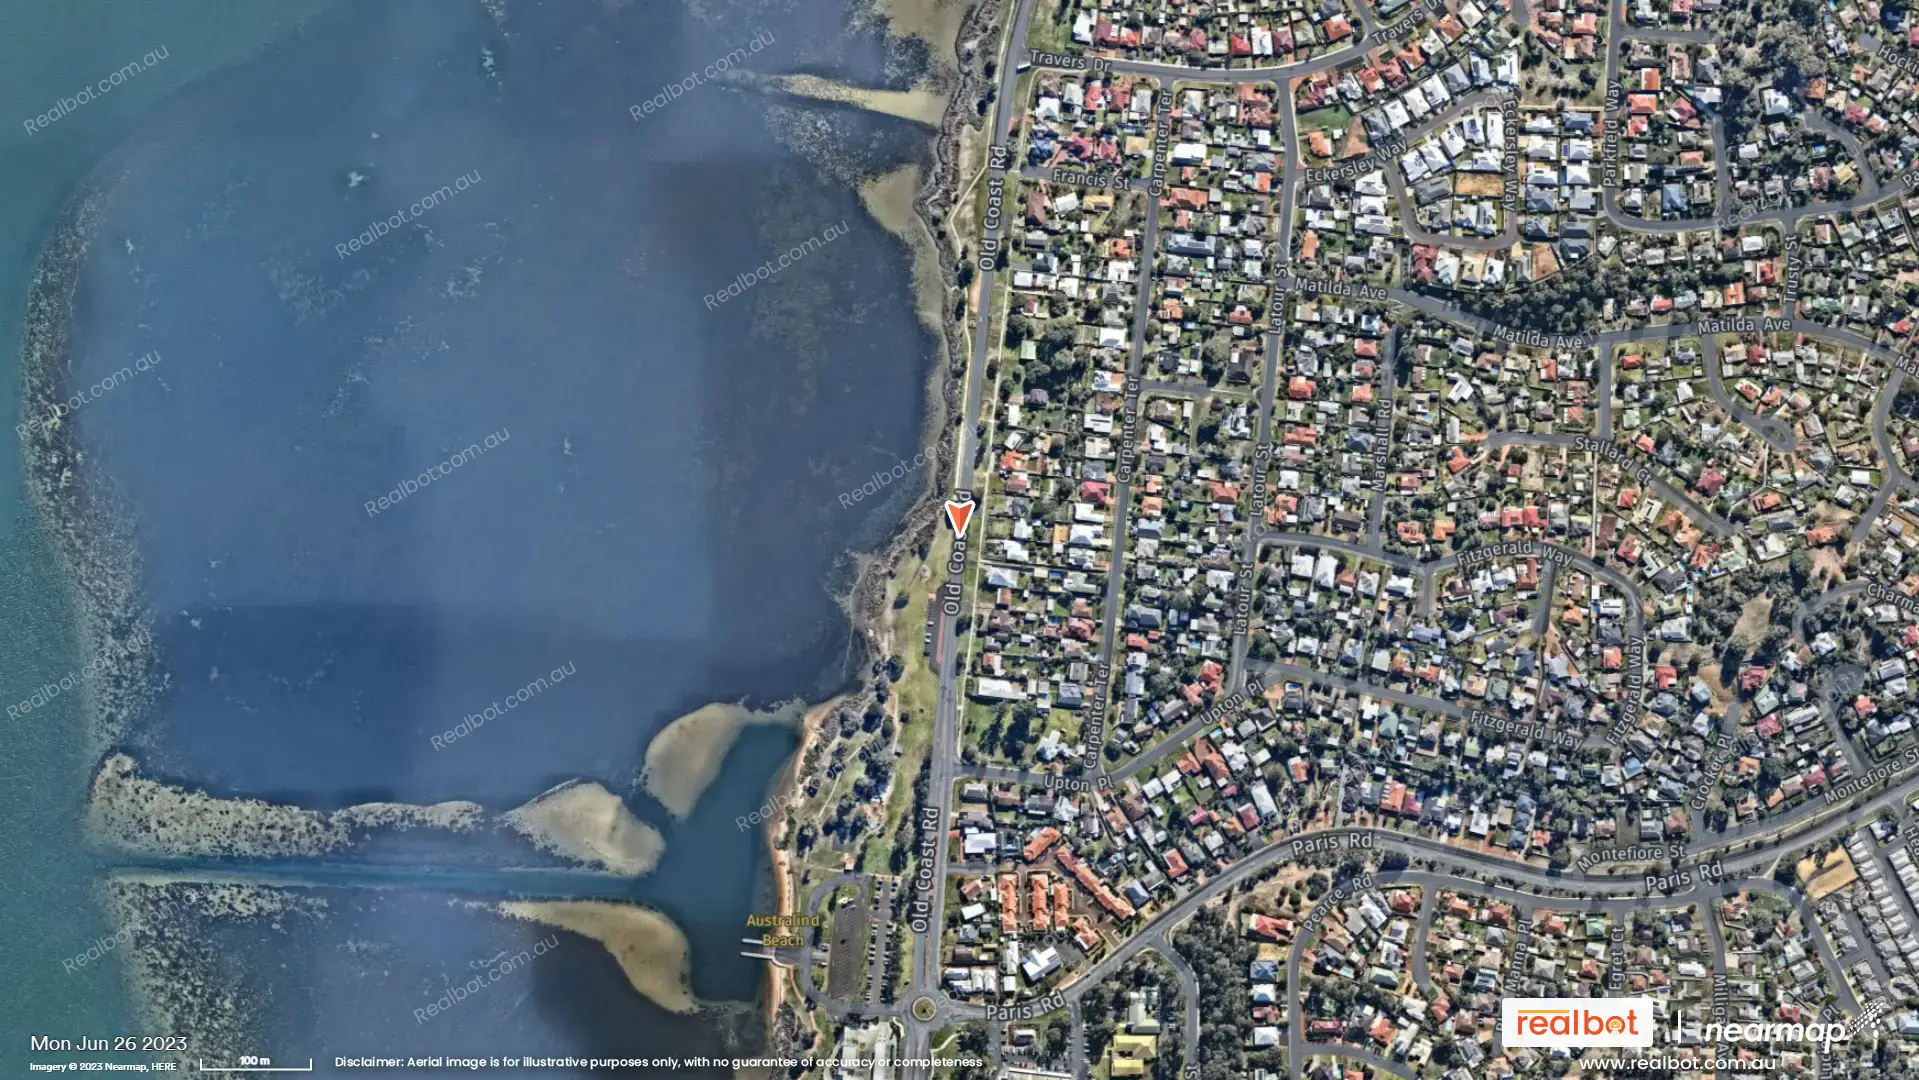 australind-wa-6233-Suburb-Profile-And-Aerial-Images-Real-Search